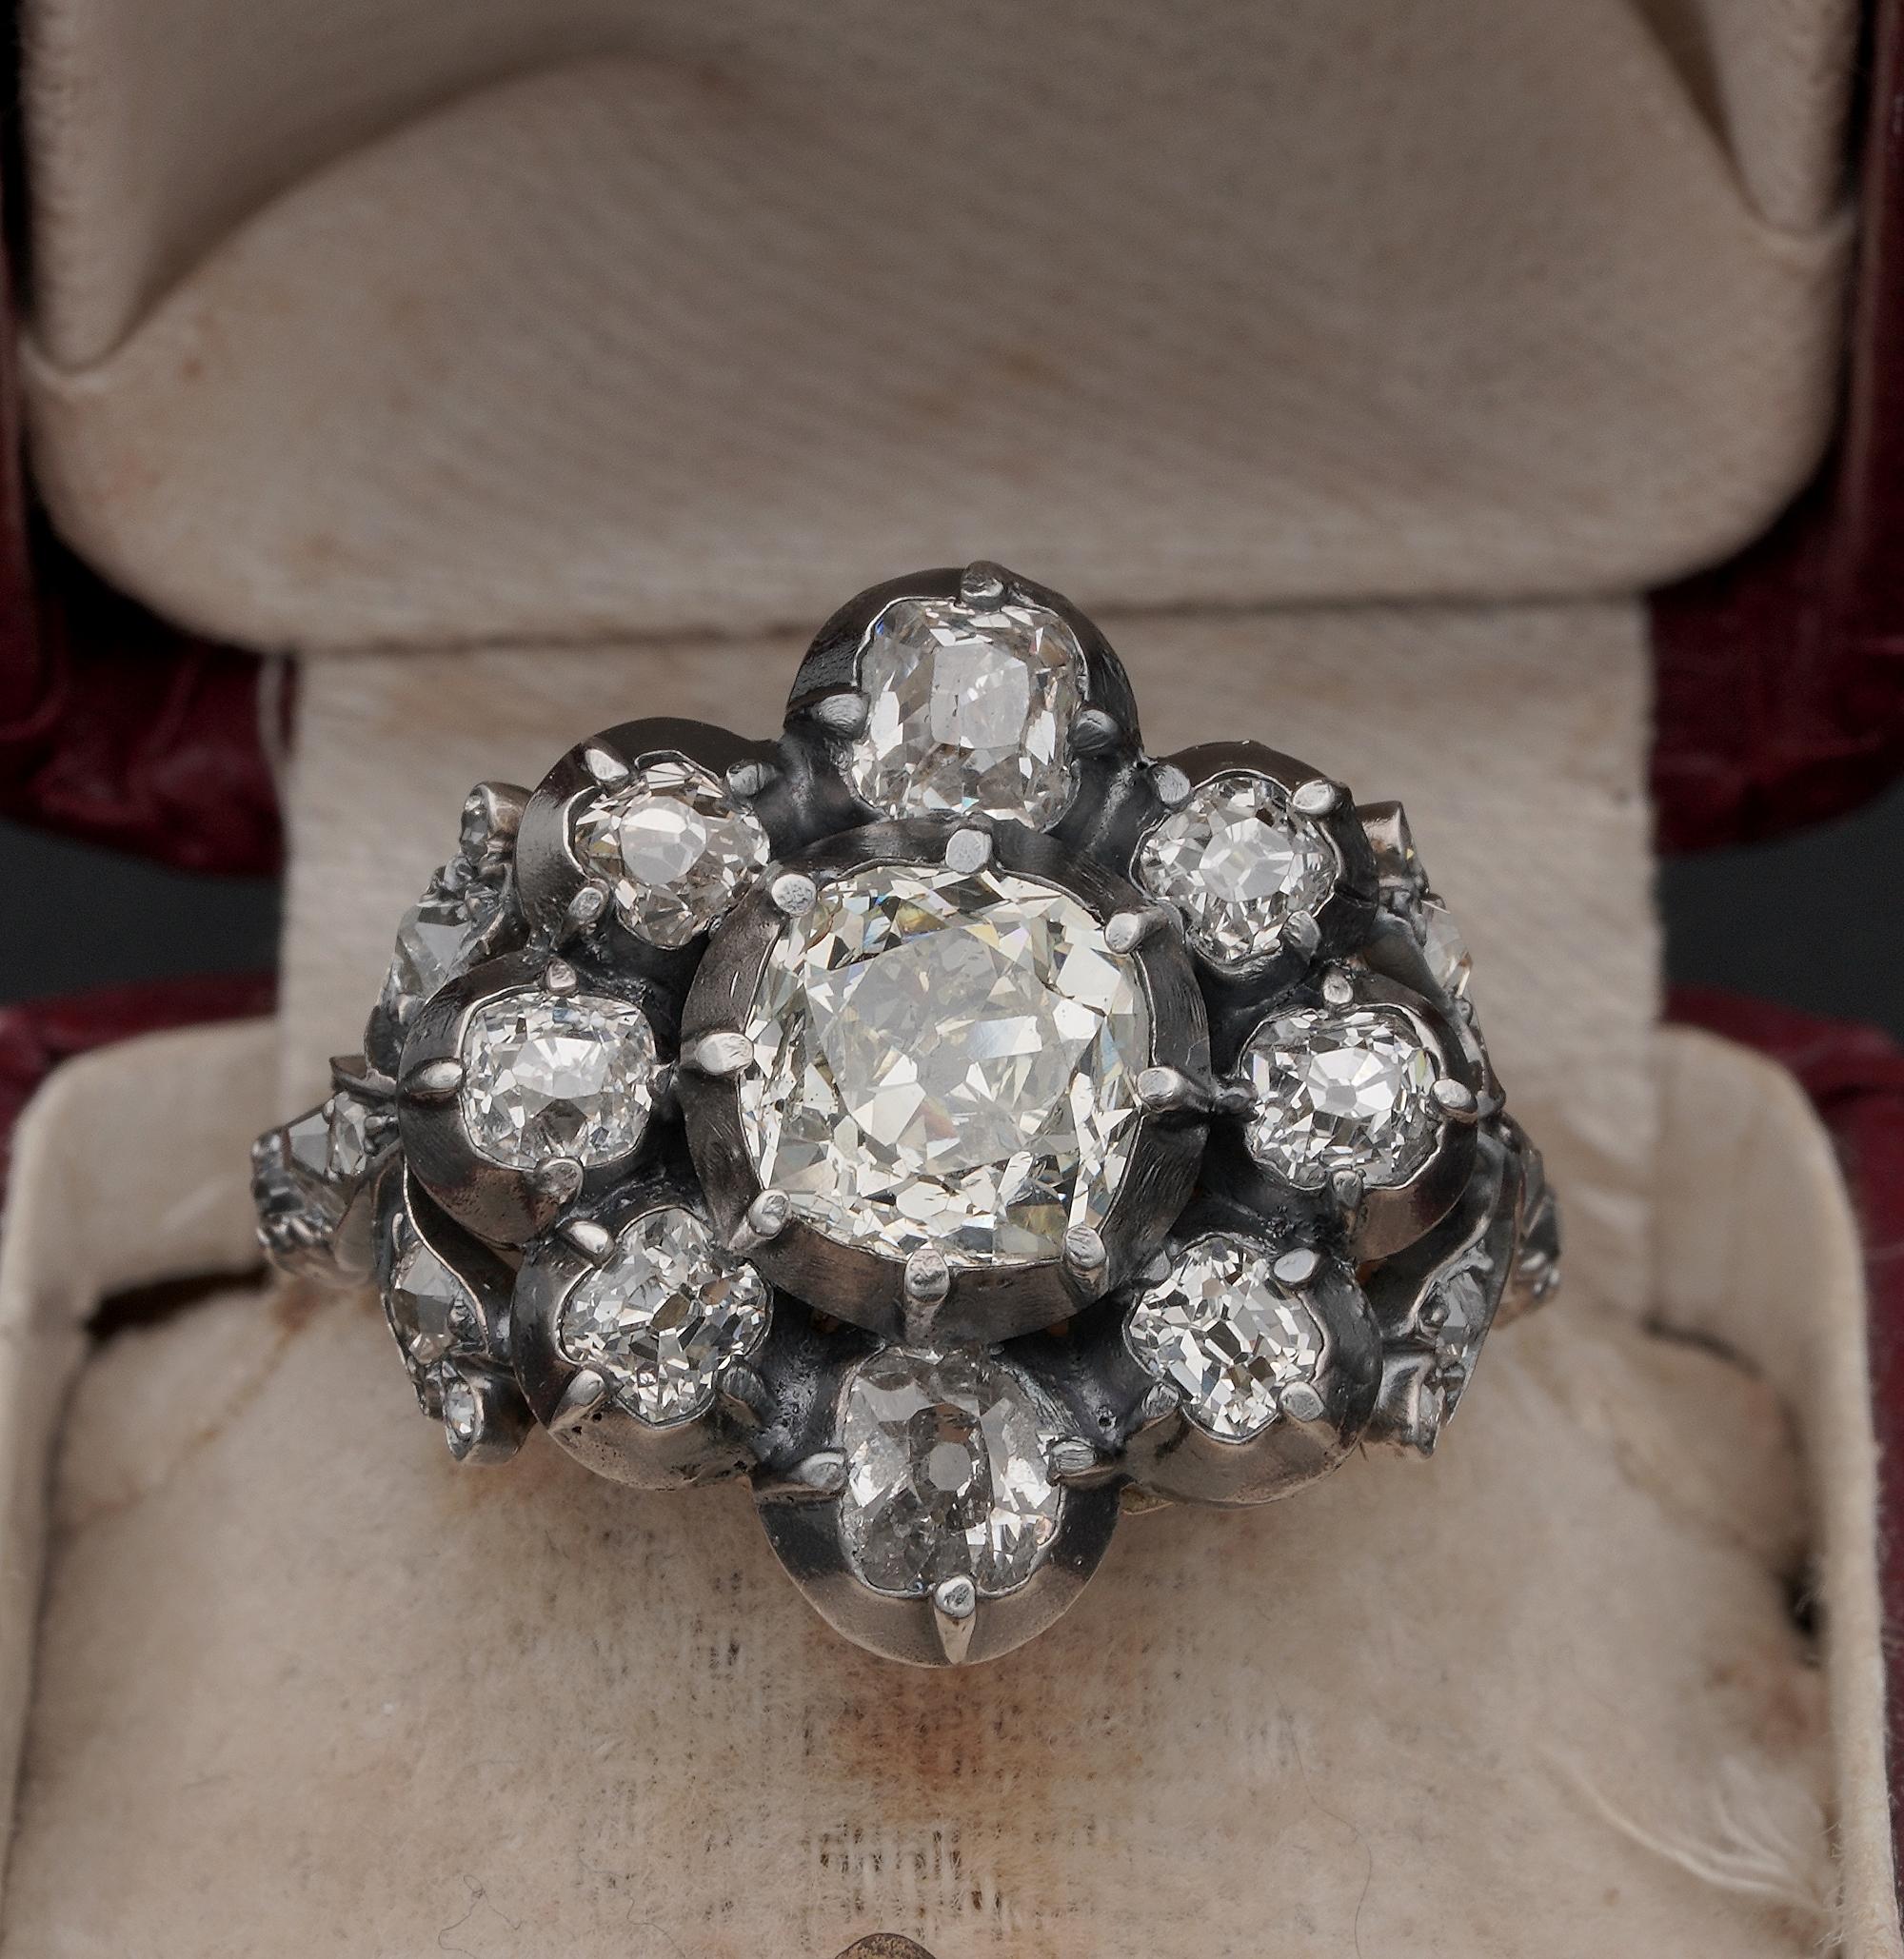 Imposing in presence, large cluster of old mine cut Diamonds with a good weight solitaire at center point and surround of more Diamonds with gorgeous Diamond bow sides
French import marks 1890 ca
Centre Diamond is an old mine cut Diamond of 1.60 Ct